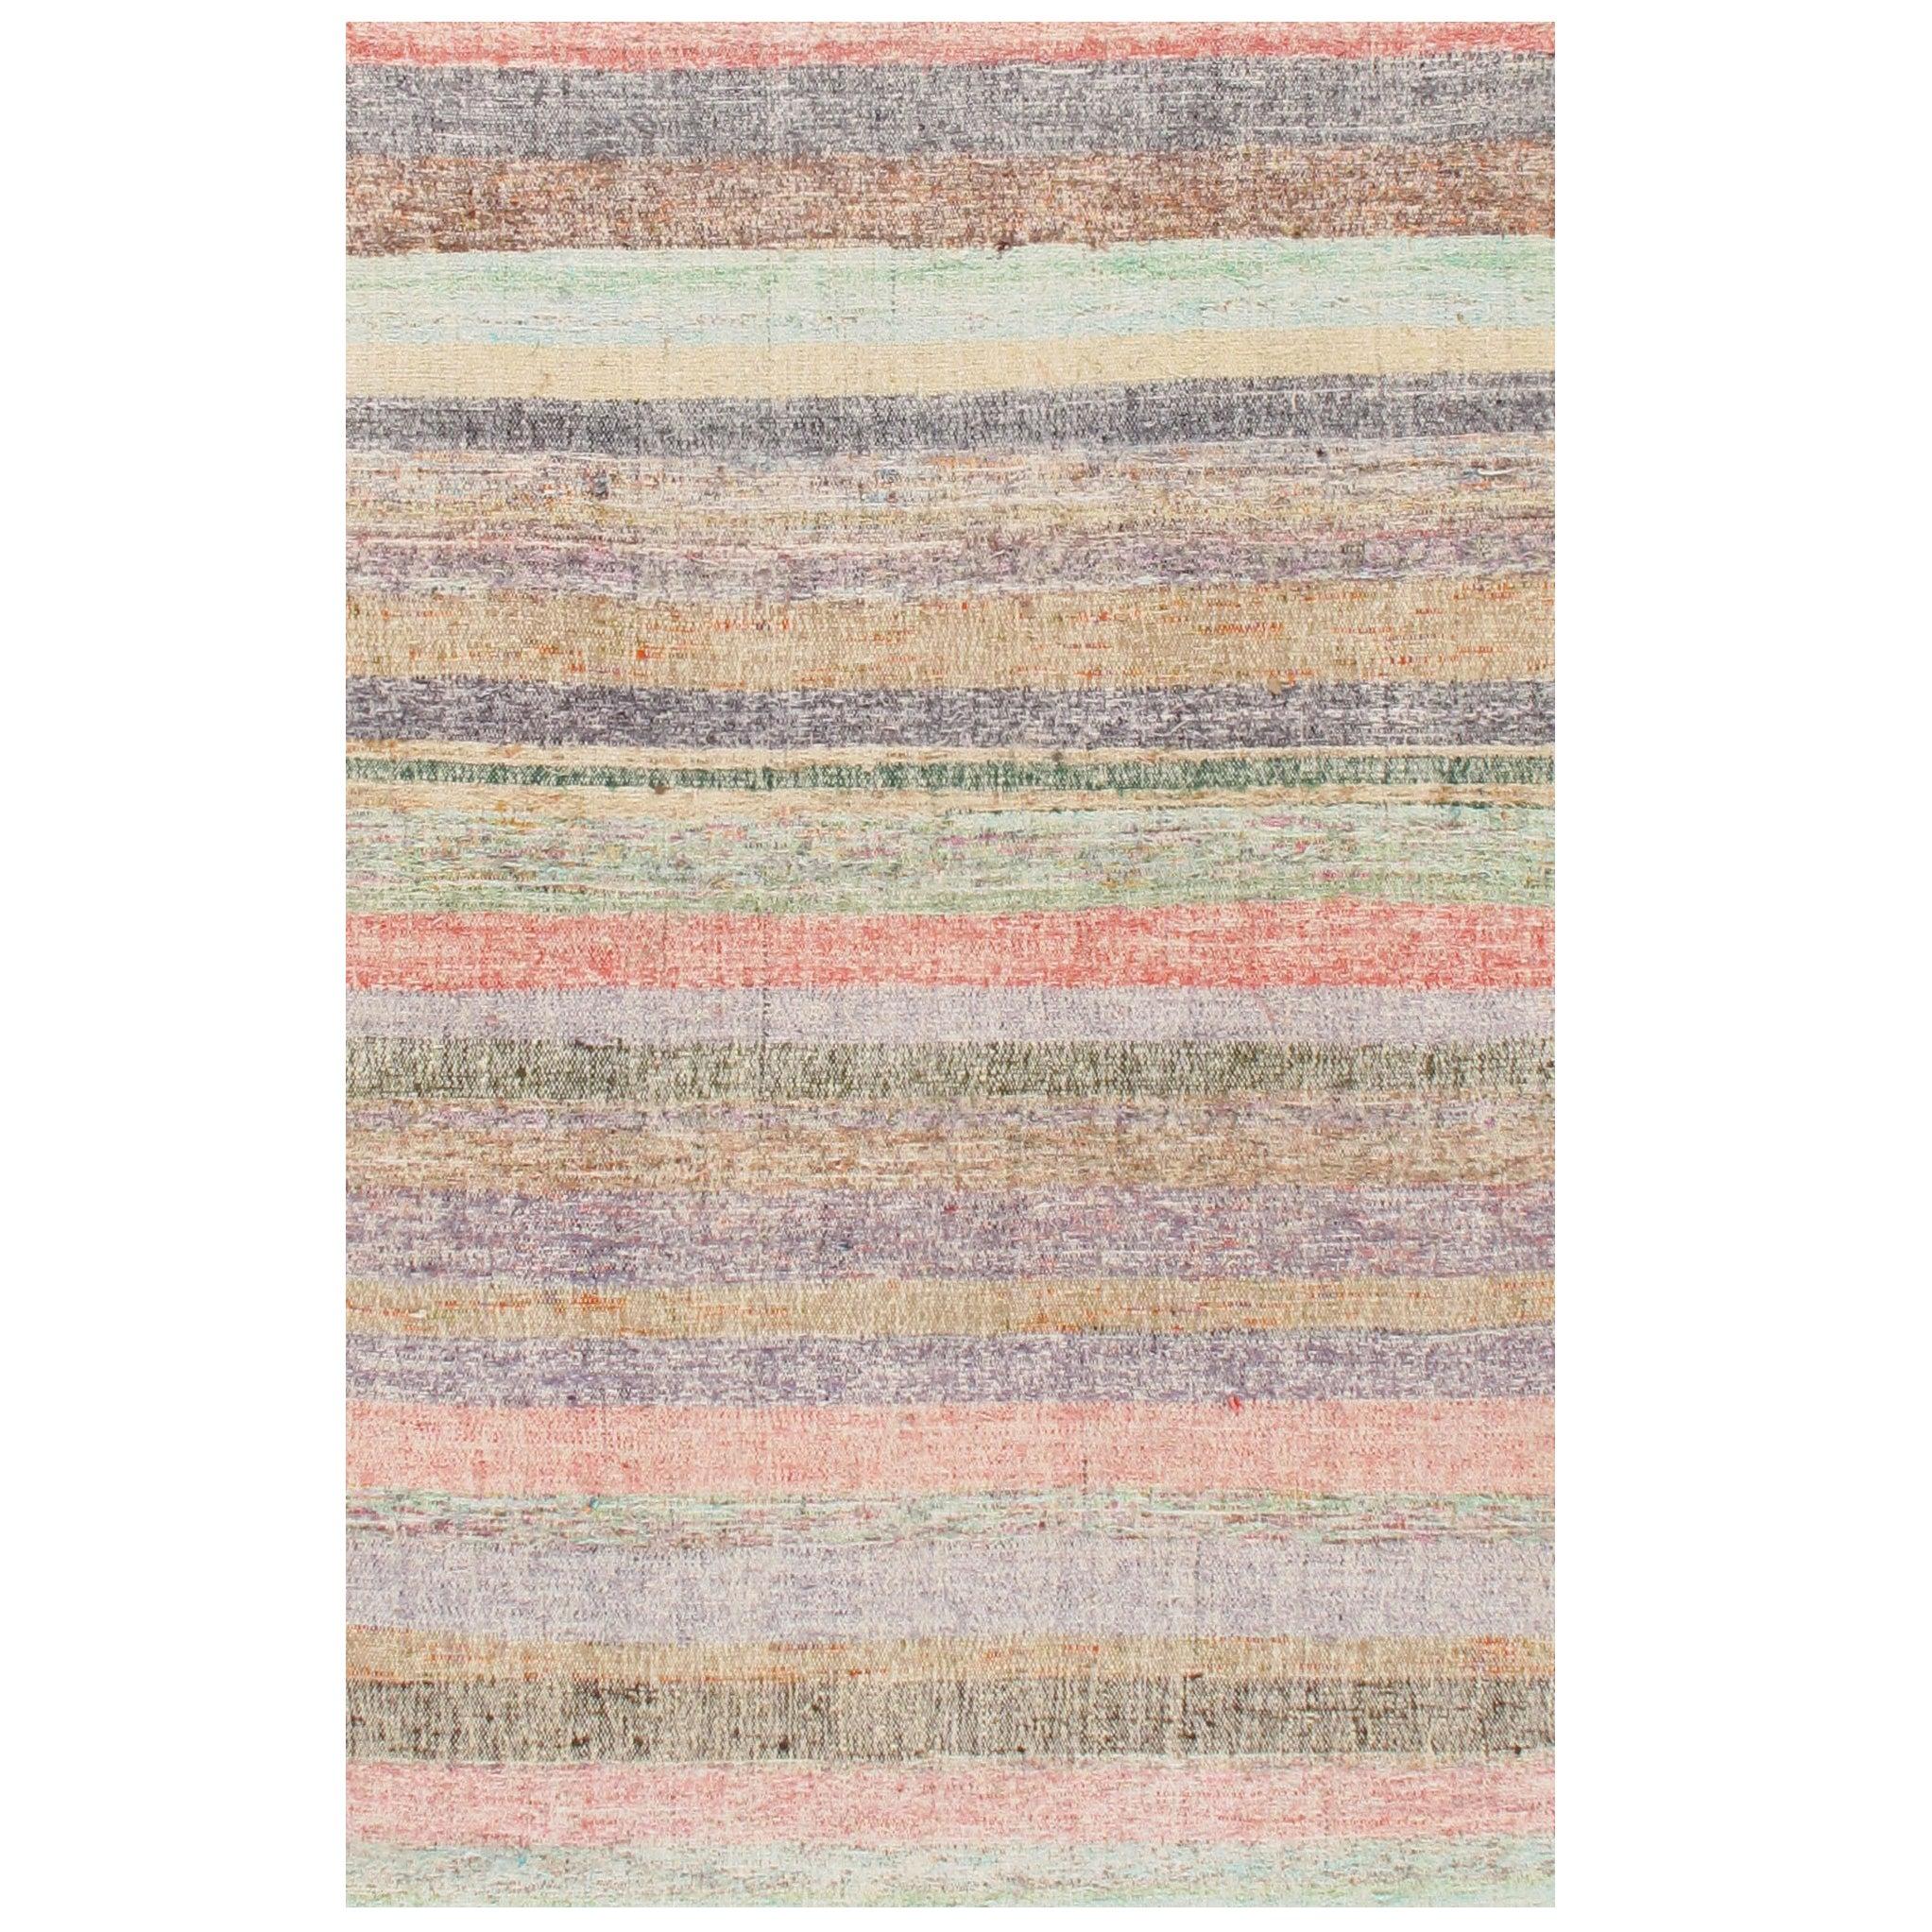 Turkish Kilim long runner, this vintage Turkish flat-weave Kilim was handwoven in the 1960s.The simplicity and boldness of these pieces can also give a contemporary feel and can look at home in both a modern or traditional setting. Size: 3'9 x 24'2.